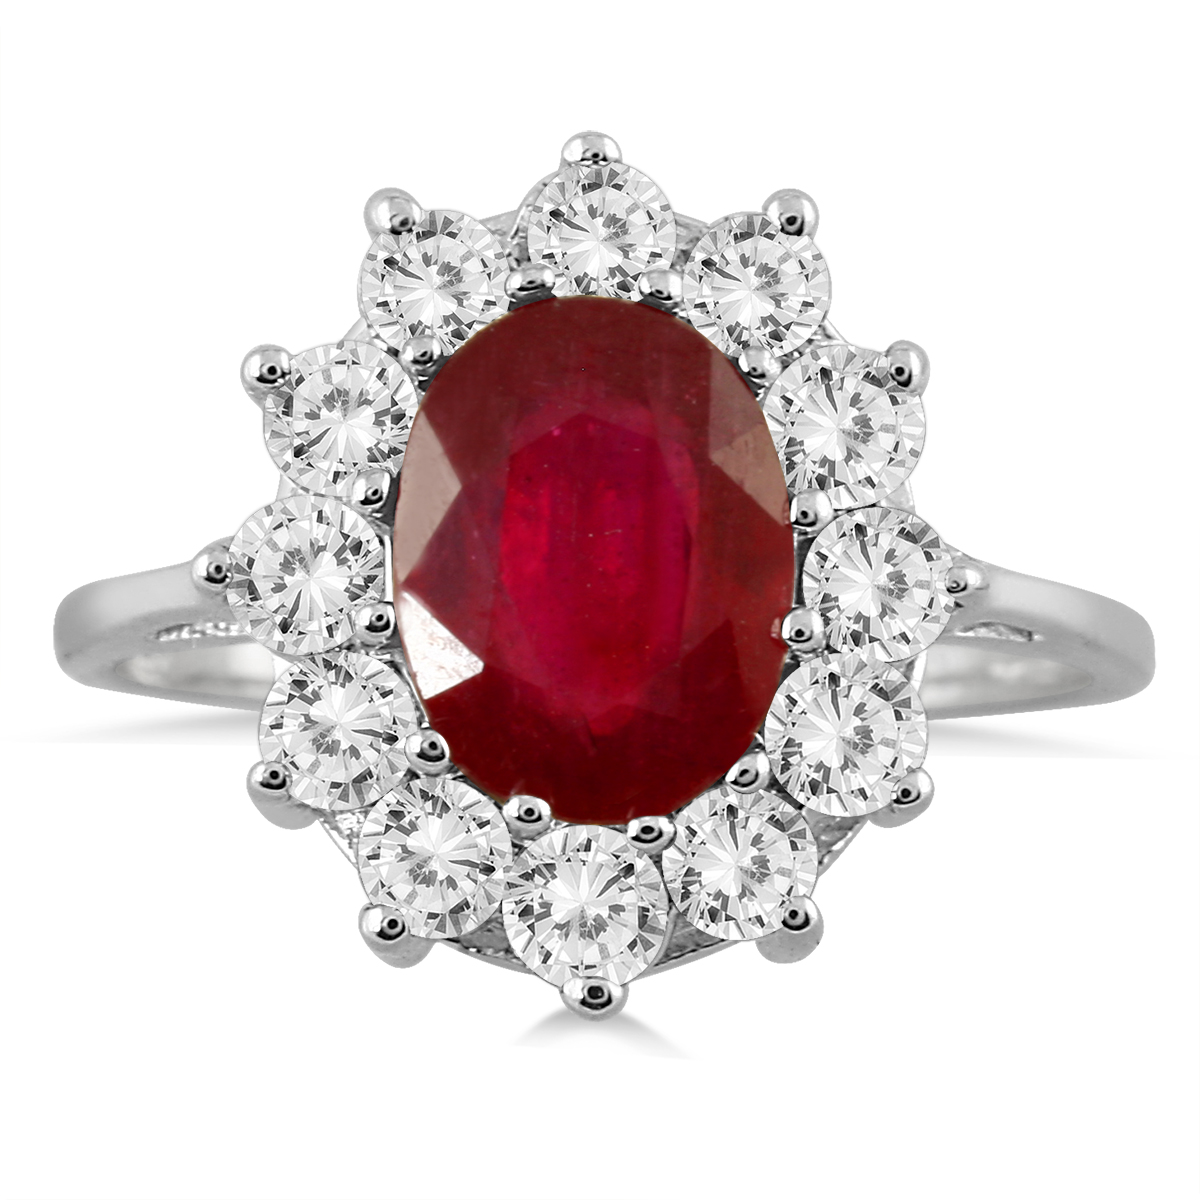 1 carat Diamond and Ruby Ring in 14K White Gold